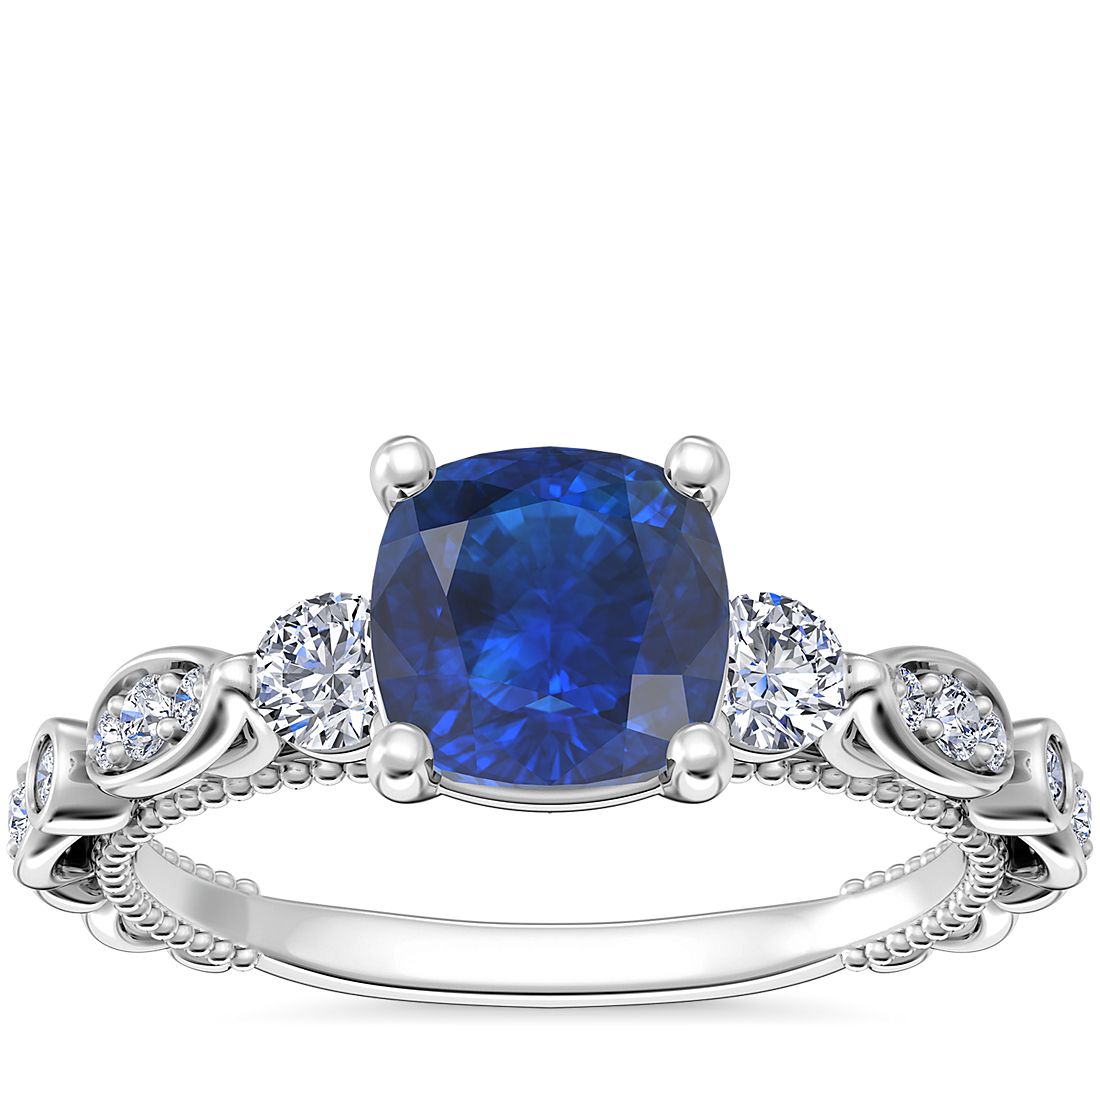 Floral Ellipse Diamond Cathedral Engagement Ring with Cushion Sapphire in Platinum (6mm)